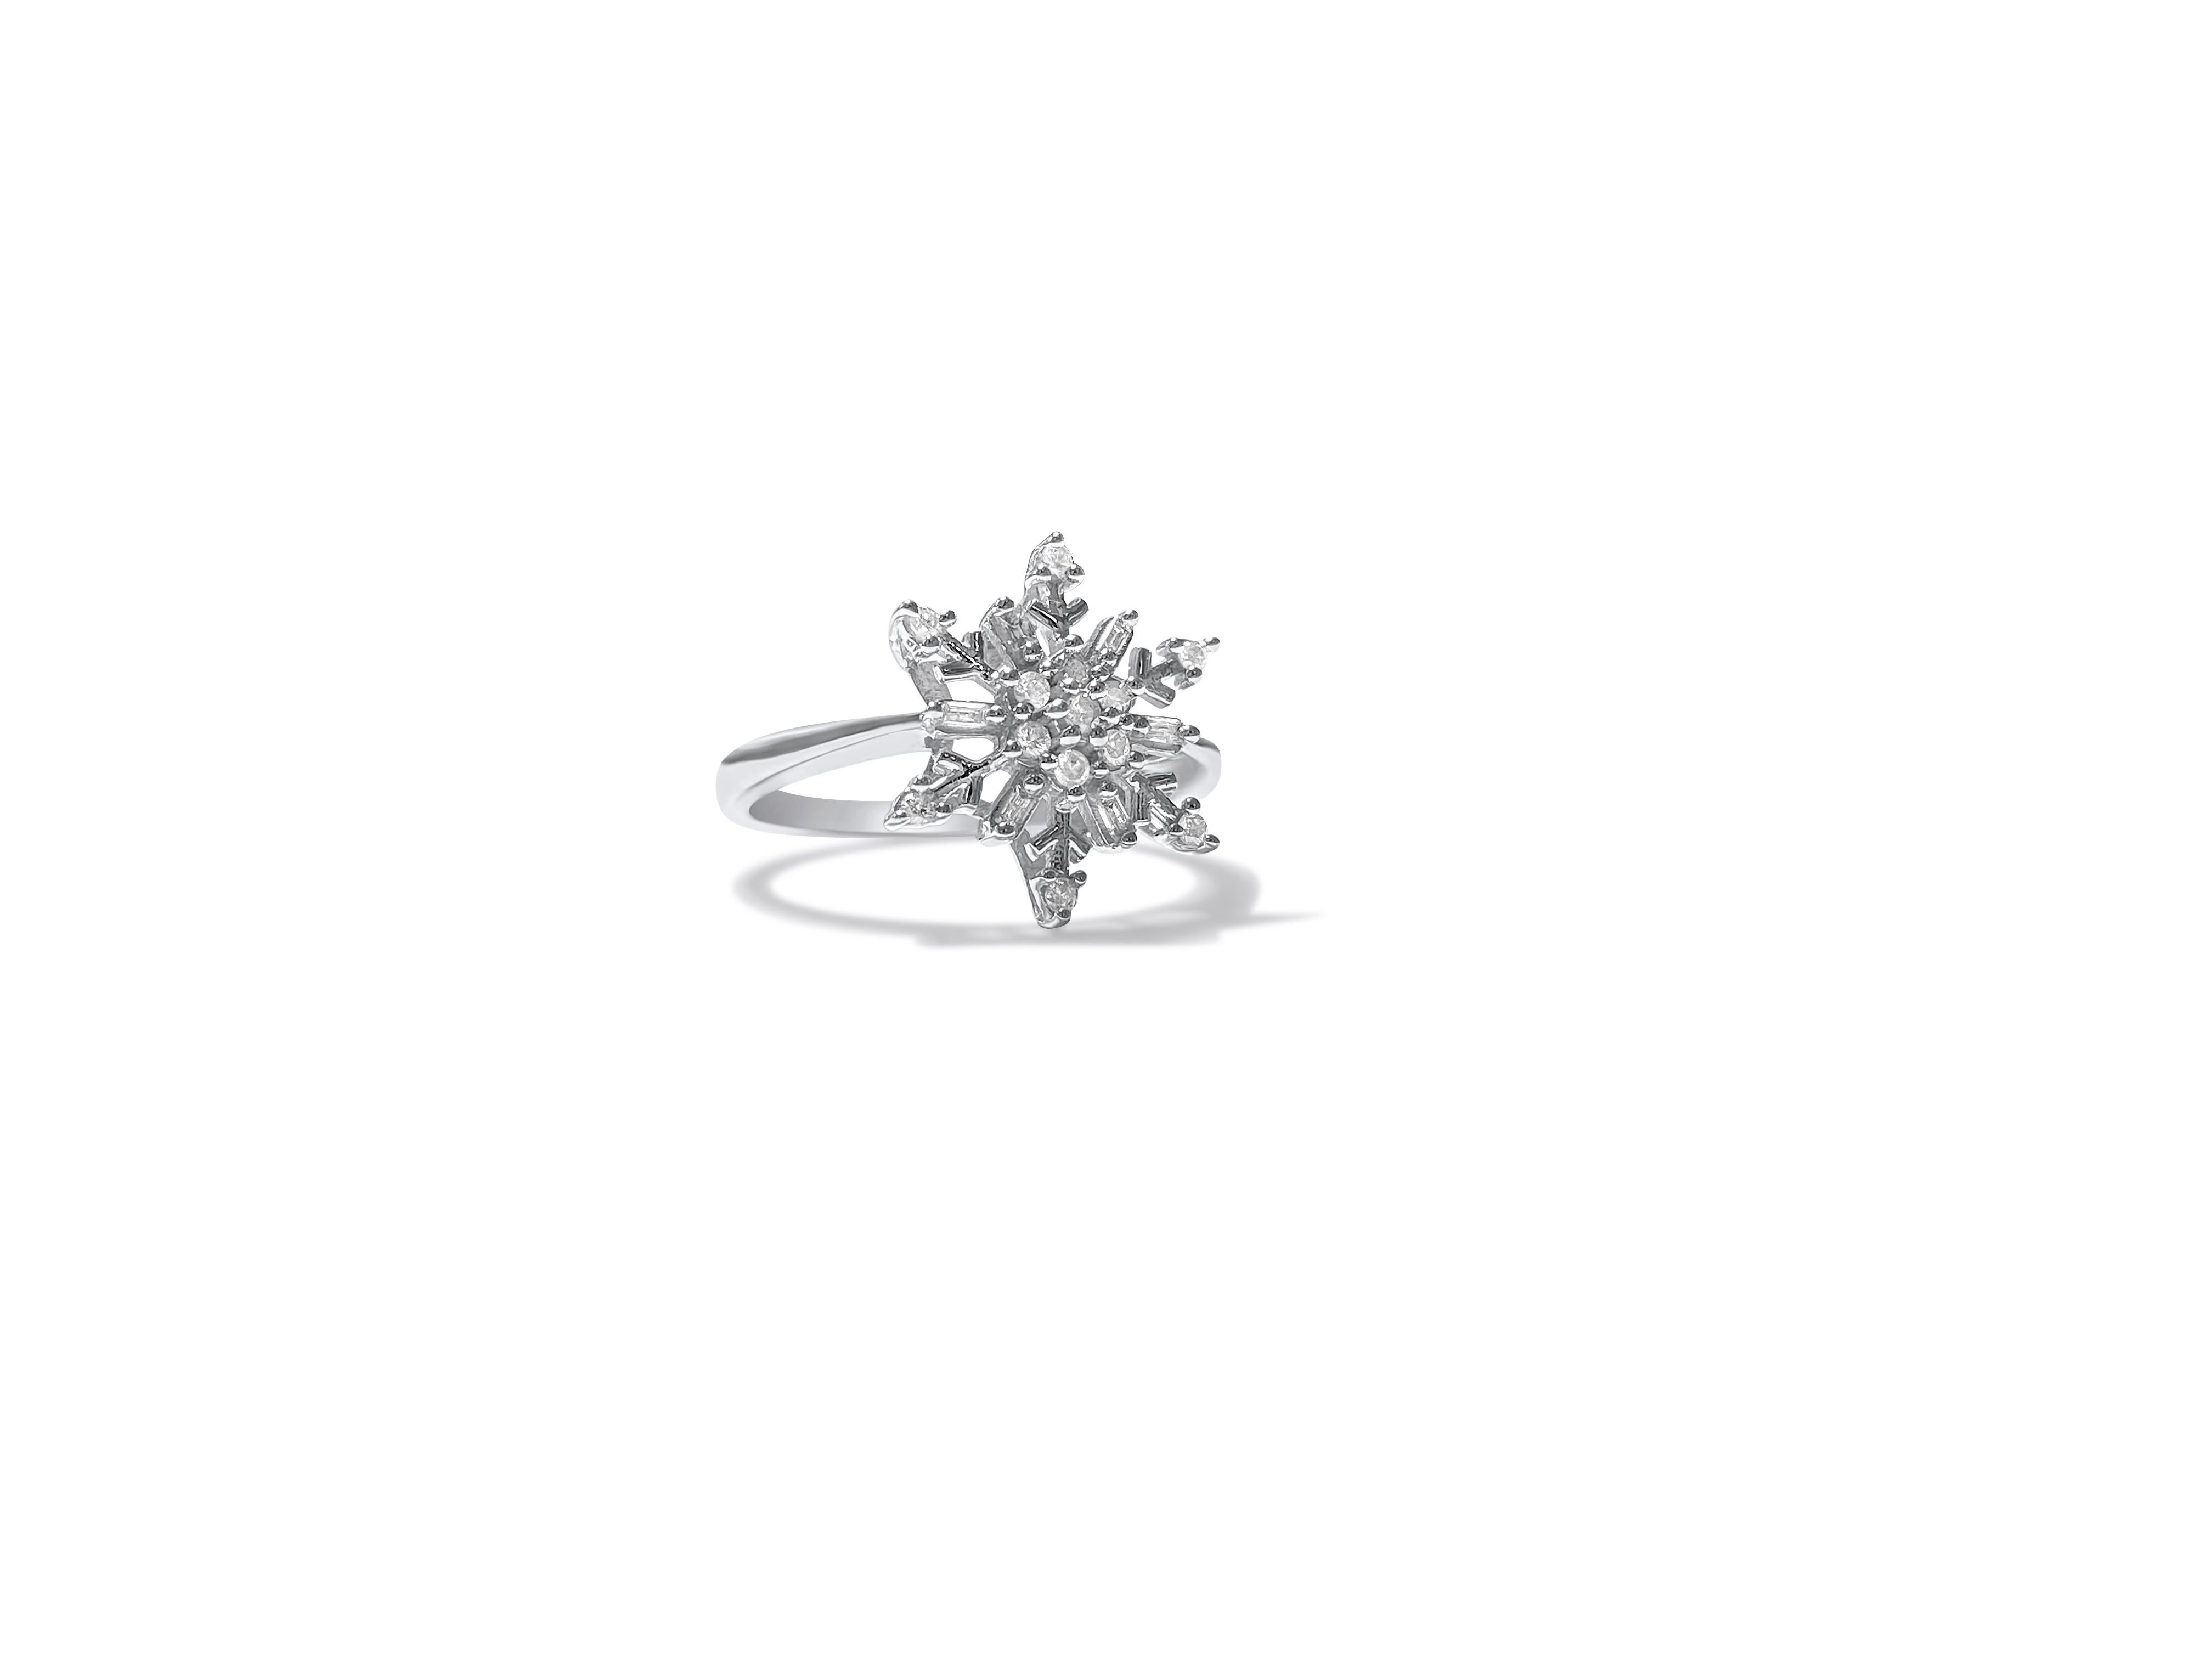 14k white gold. 
Diamonds: 0.50 cwt. 
SI-2 clarity and F-G color diamonds. 
Round brilliant cut diamonds set in prongs. 
100% natural earth mined. 

Extremely gorgeous ring. Beautiful snowflake design ring. This is a custom made diamond and gold